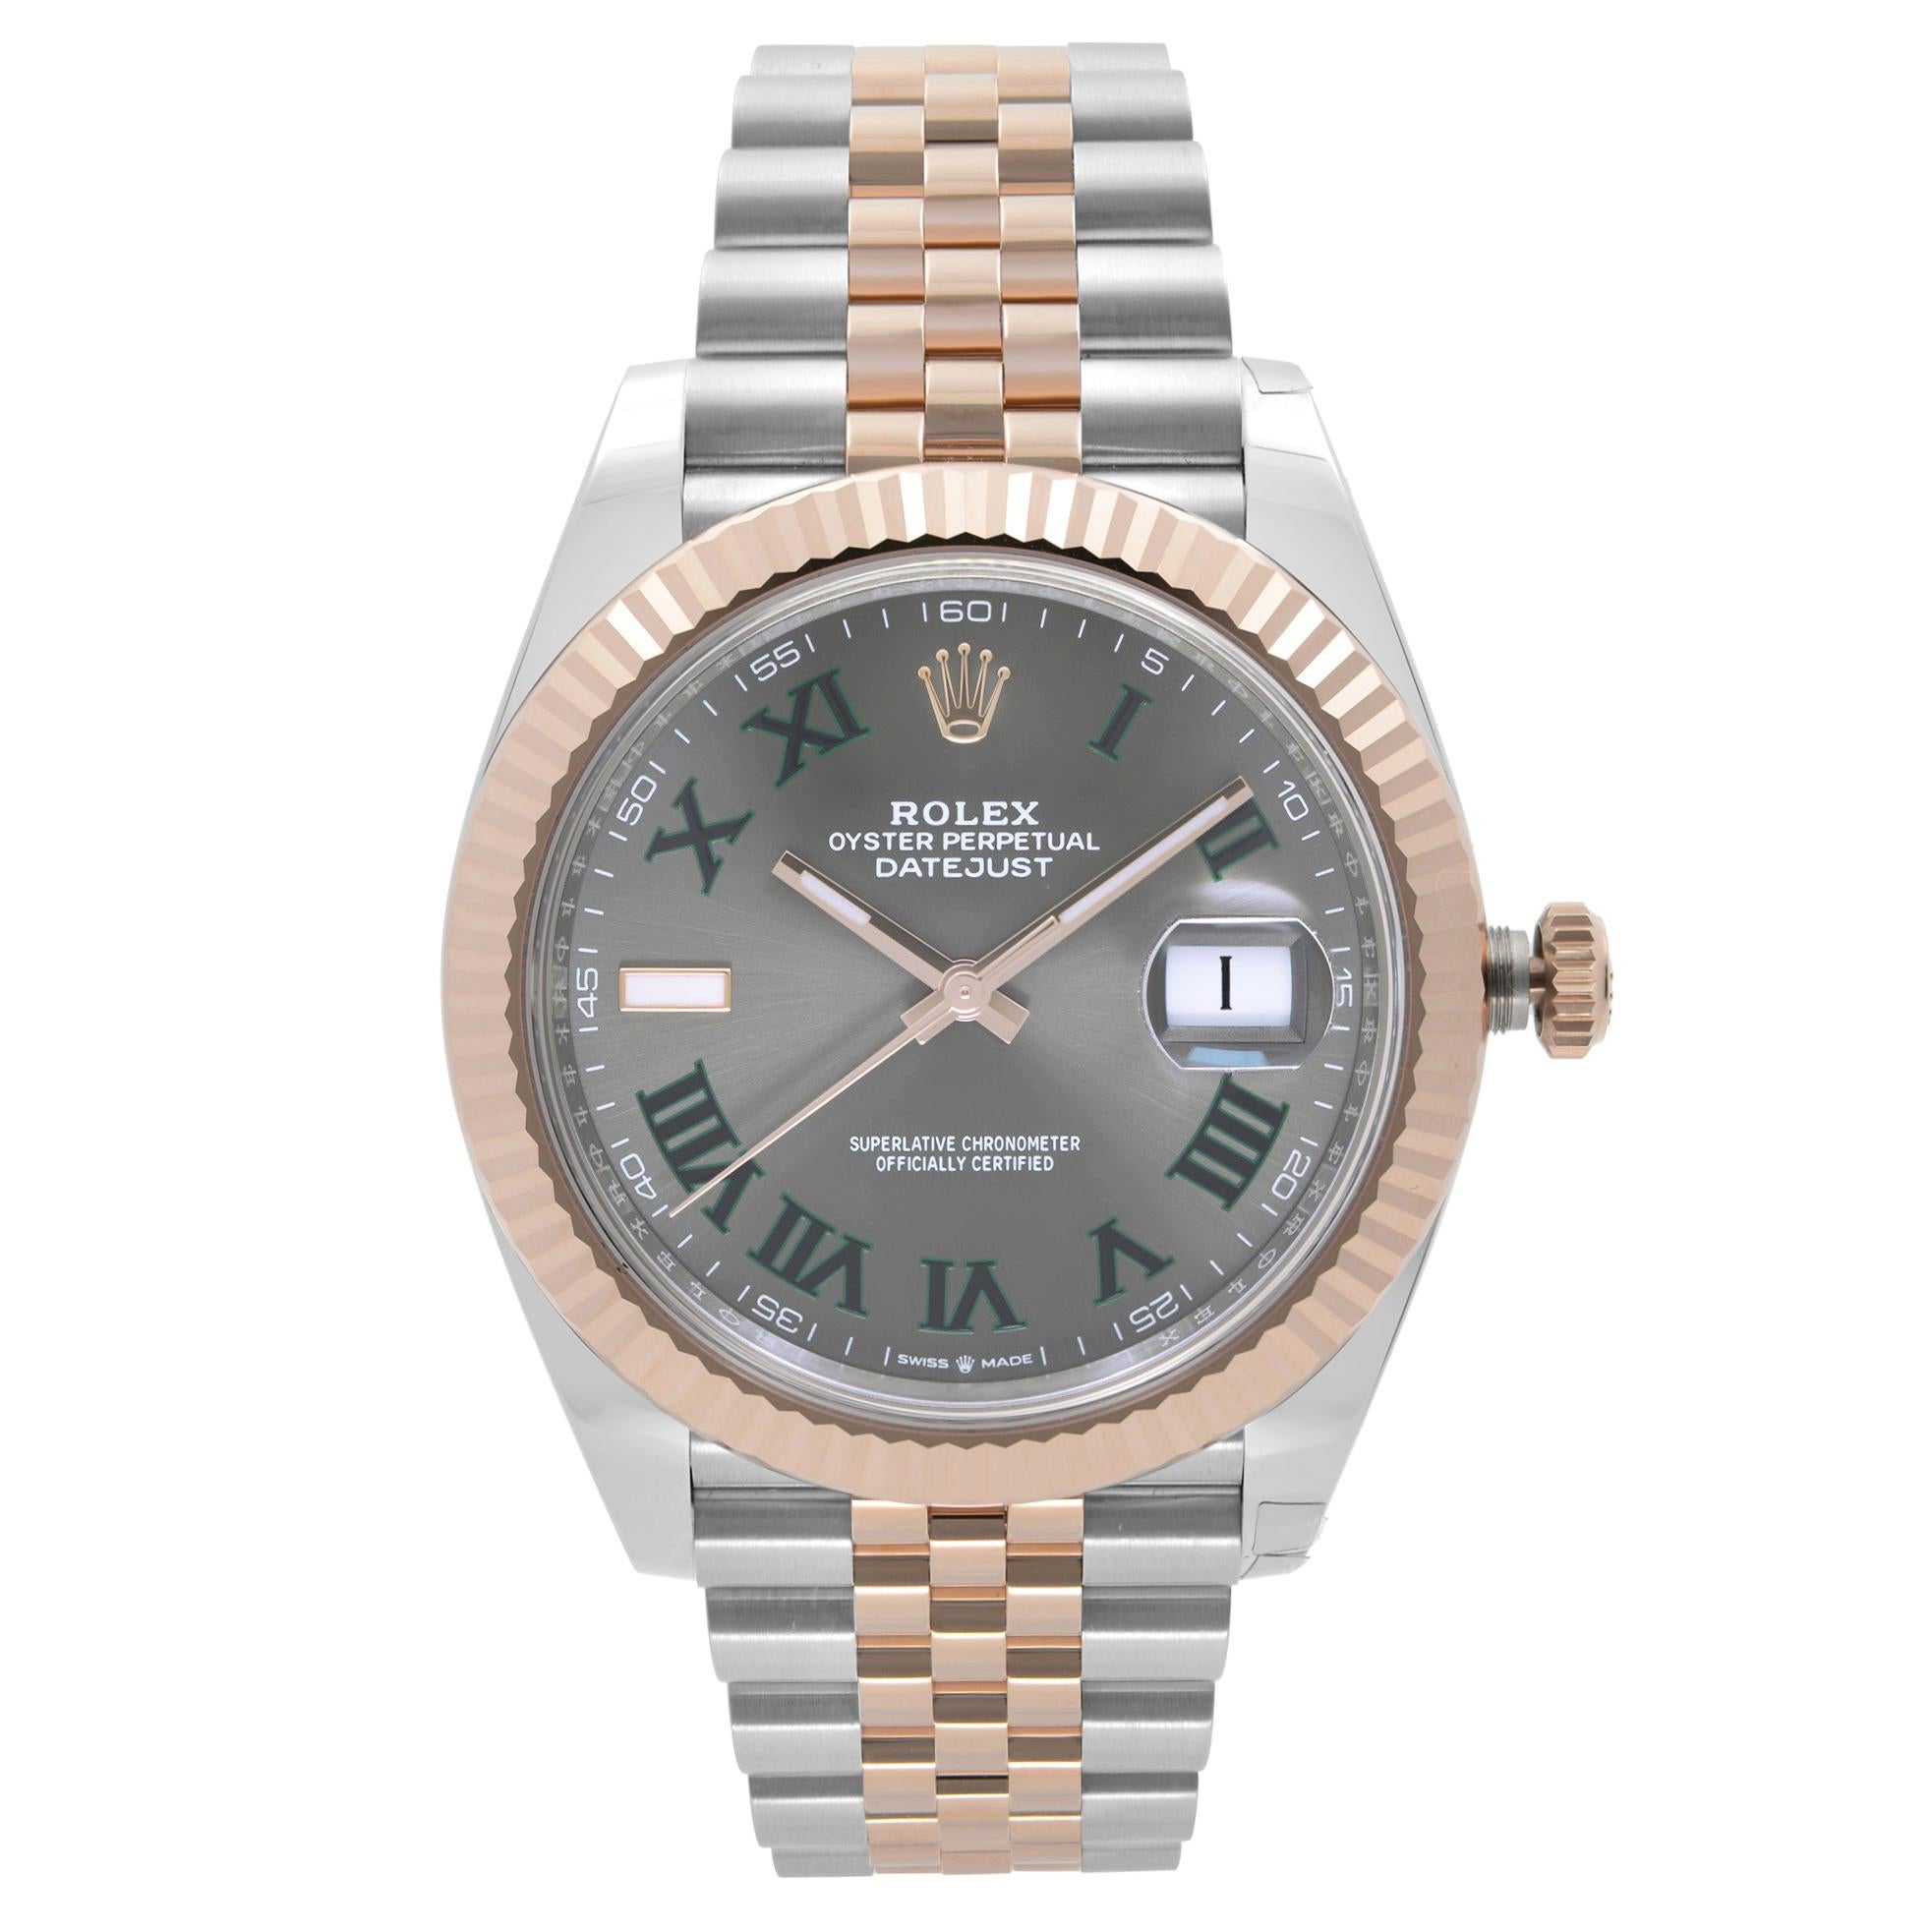 Unworn Fully Stickered Rolex Datejust 41mm Wimbledon 18k Everose Gold Steel Dial Men's Watch 126331GYRJ. It comes with a 2022 Rolex Card. This Beautiful Timepiece Features: Stainless Steel Case and Rolex Jubilee Bracelet with 18k Everose Gold Center